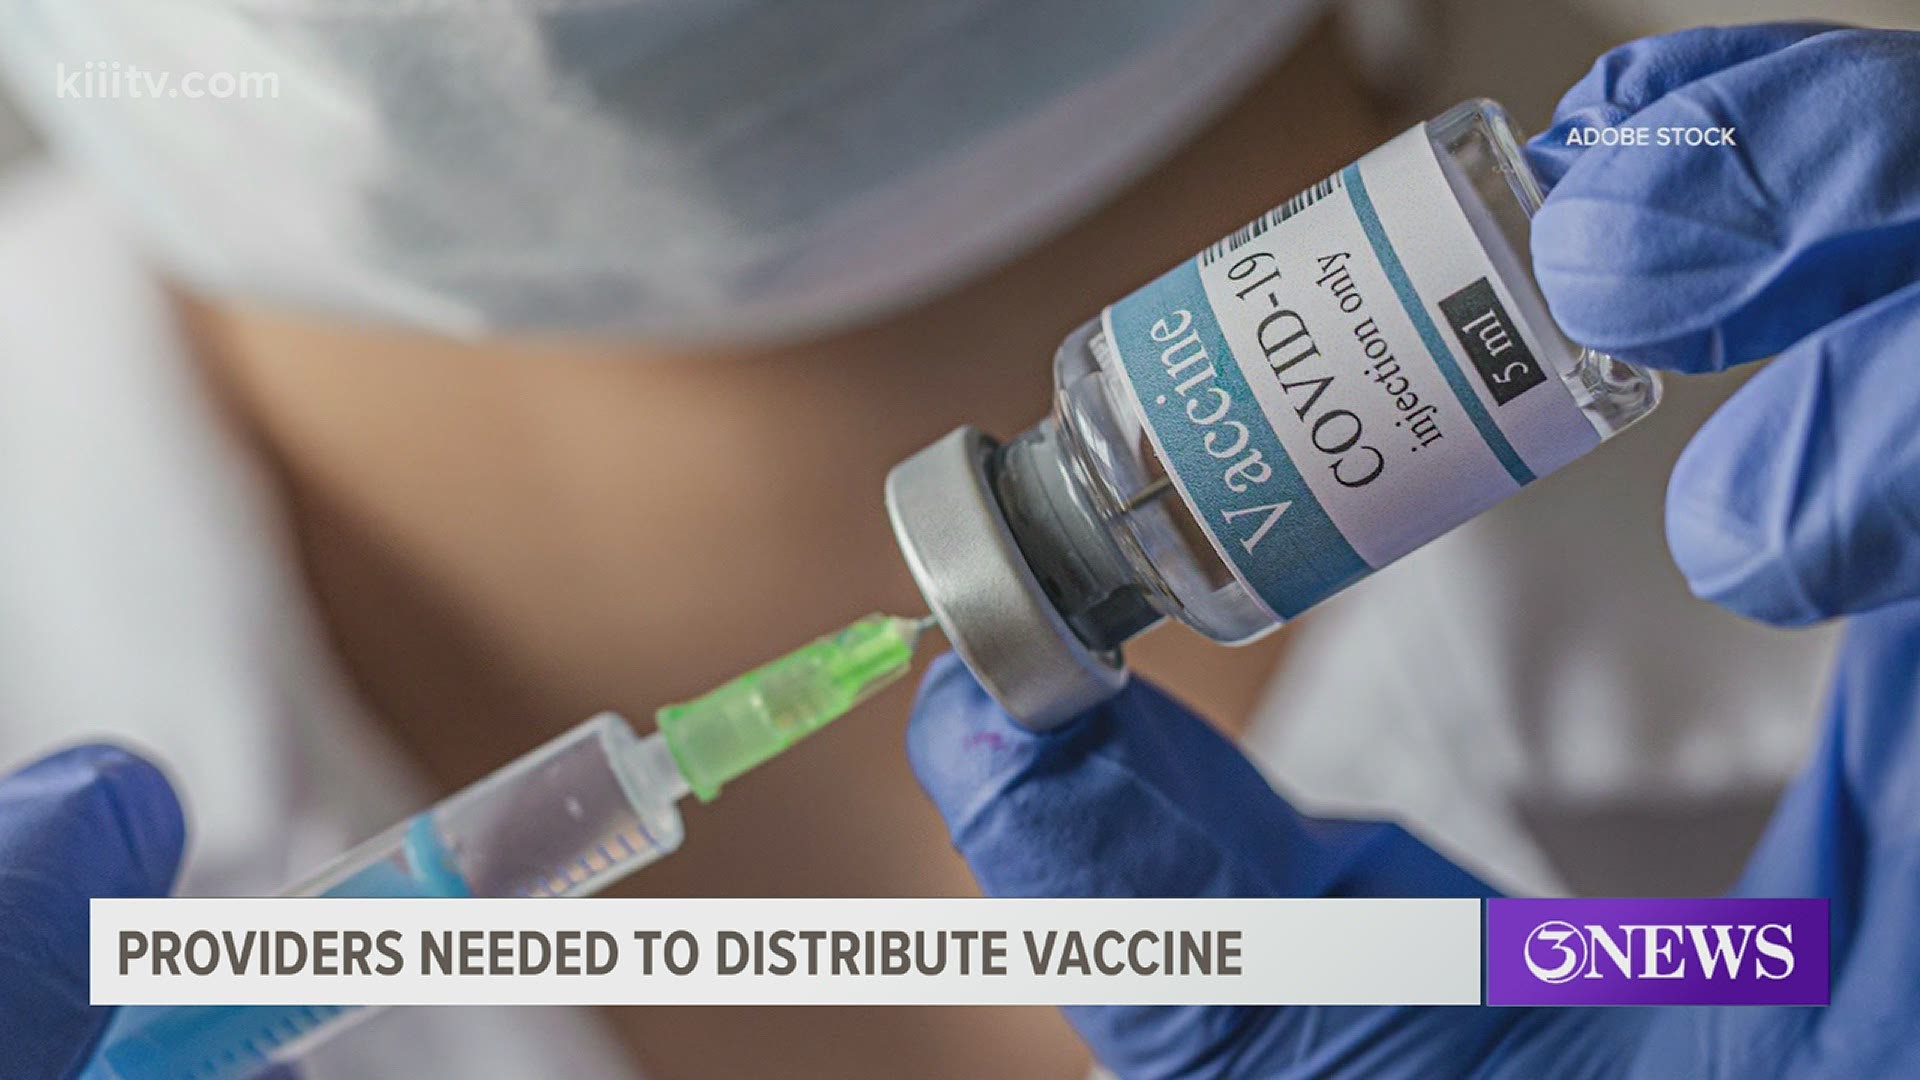 Annette Rodriguez calls for medical professionals to sign up as COVID-19 vaccine providers when the imminent remedy is available to the public.